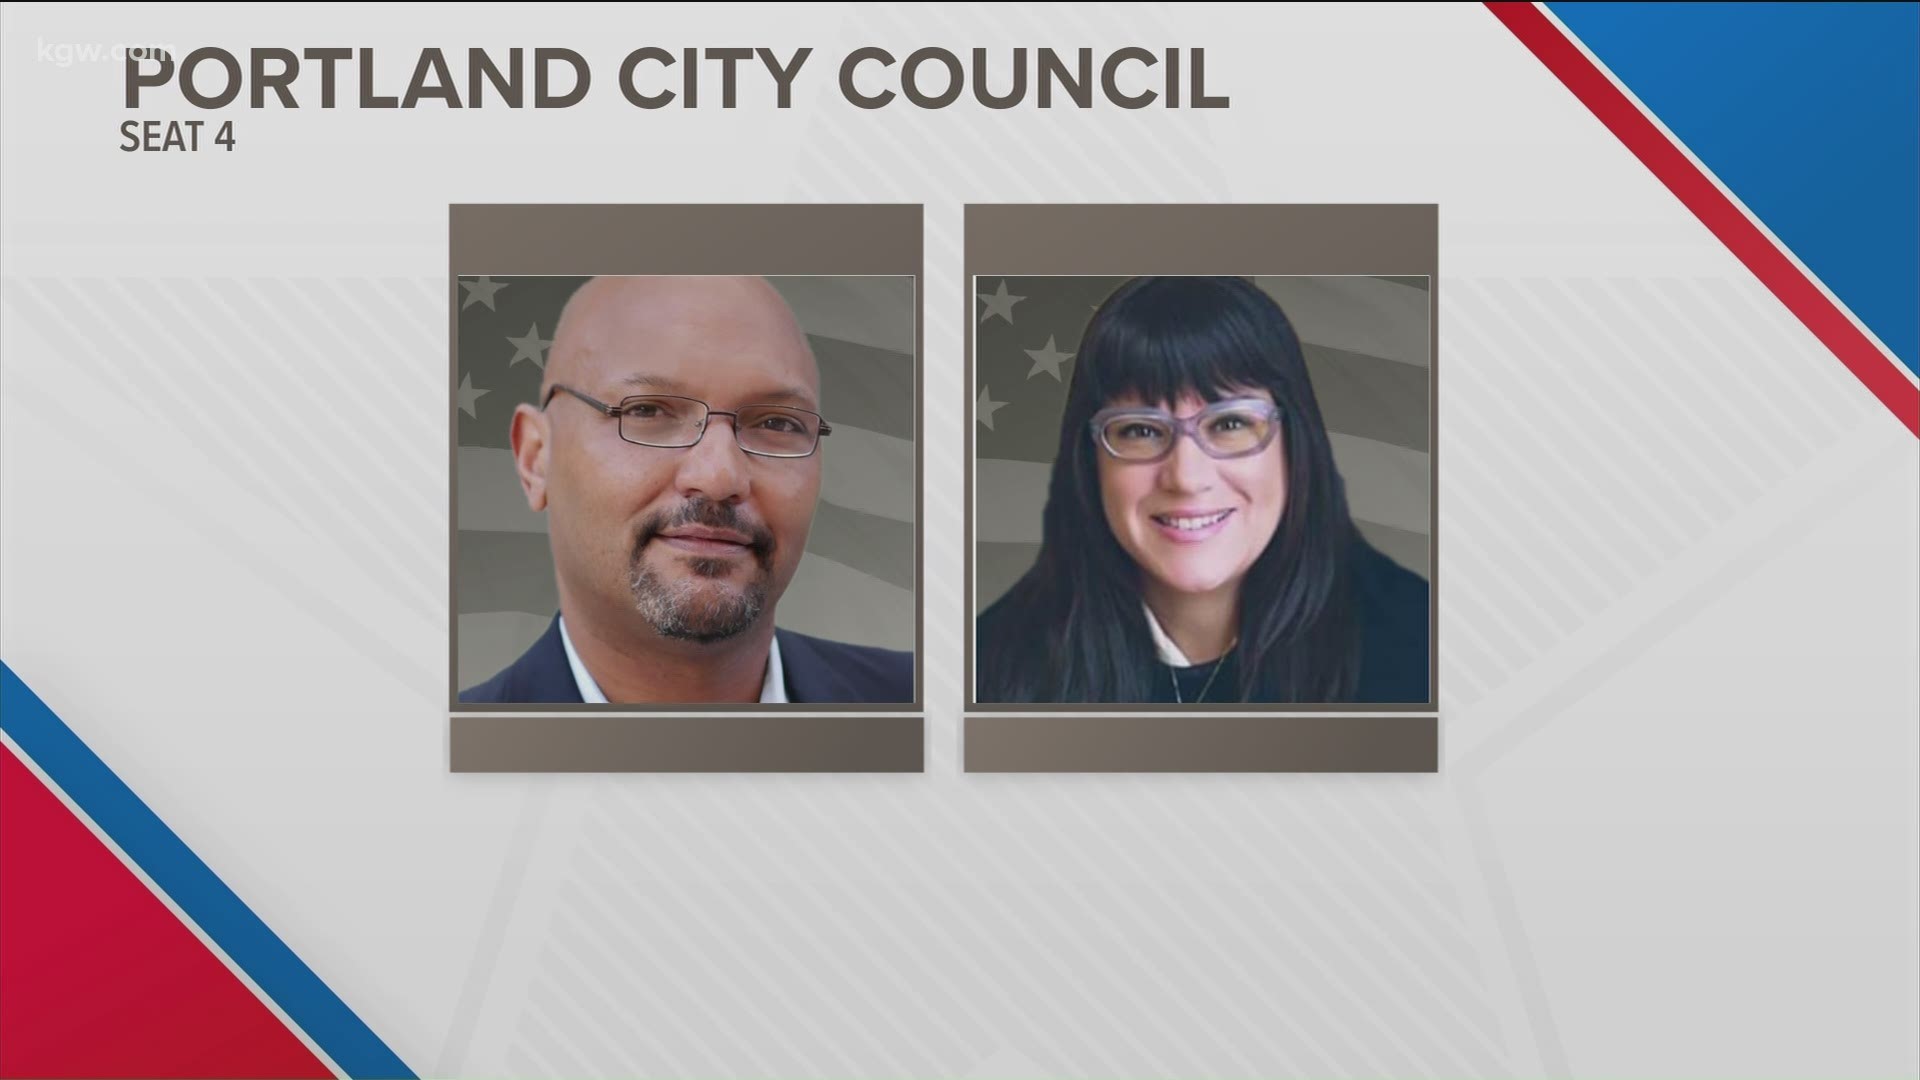 For Portlanders, one of the most important issues on the ballot is the runoff election for city council between incumbent Chloe Eudaly and challenger Mingus Mapps.